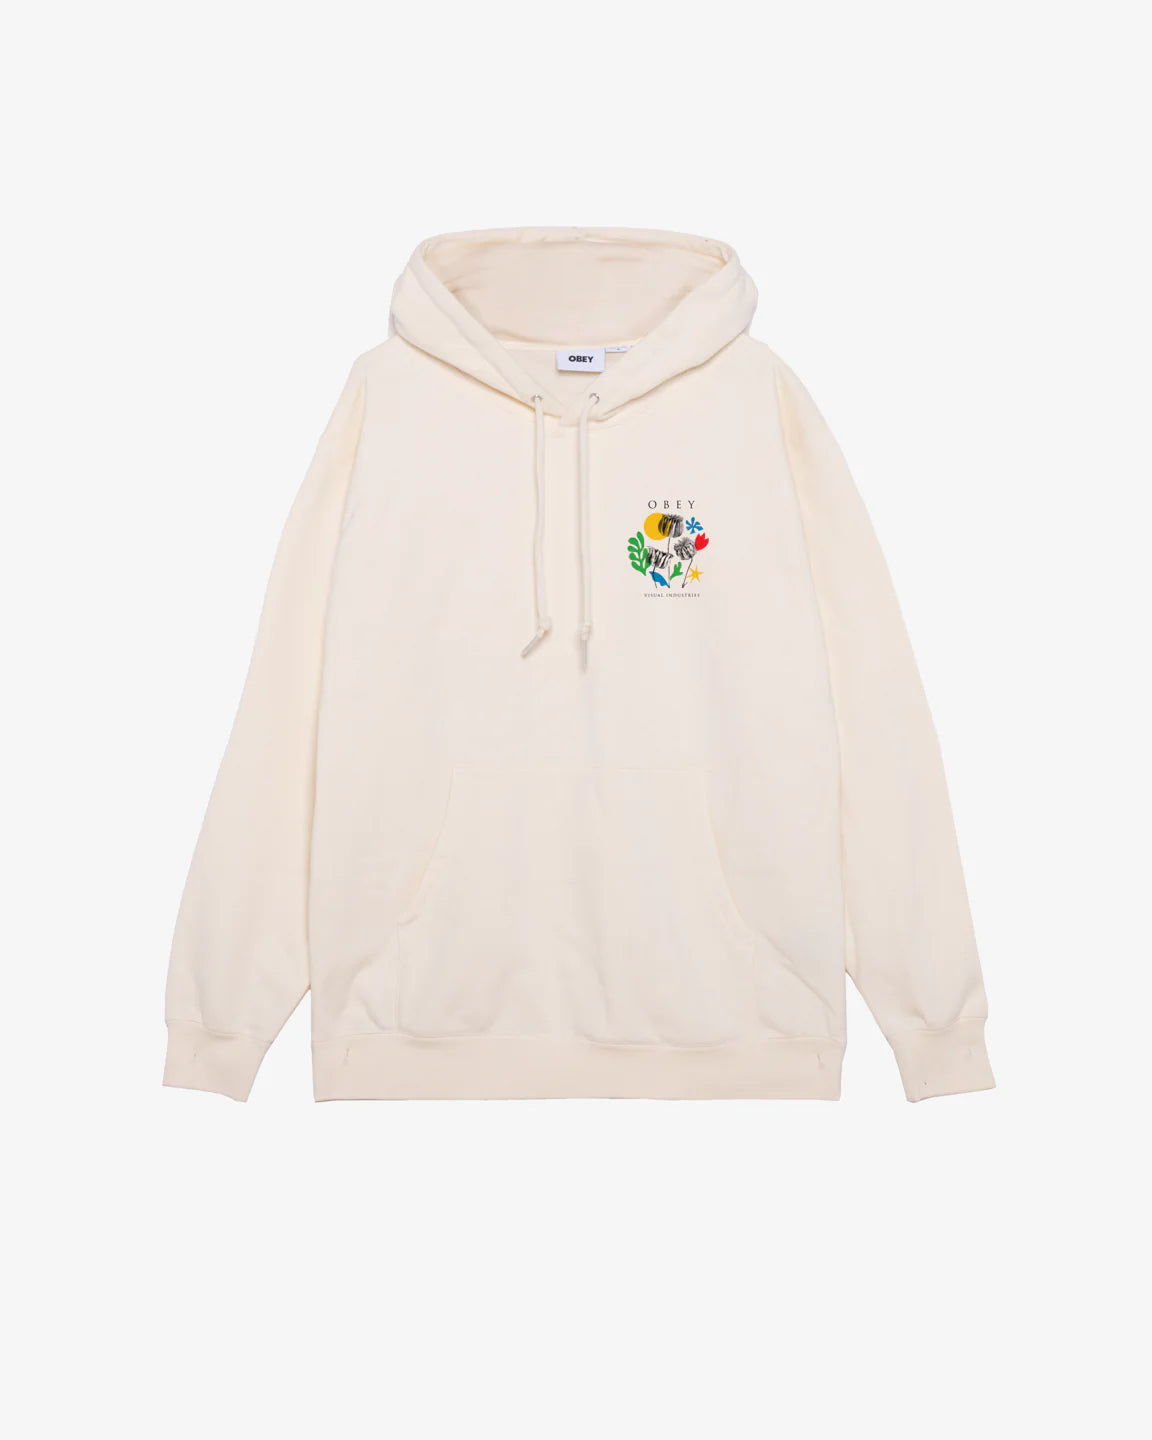 OBEY FLOWERS PAPERS SCISSORS HEAVYWEIGHT PULLOVER - Unbleached